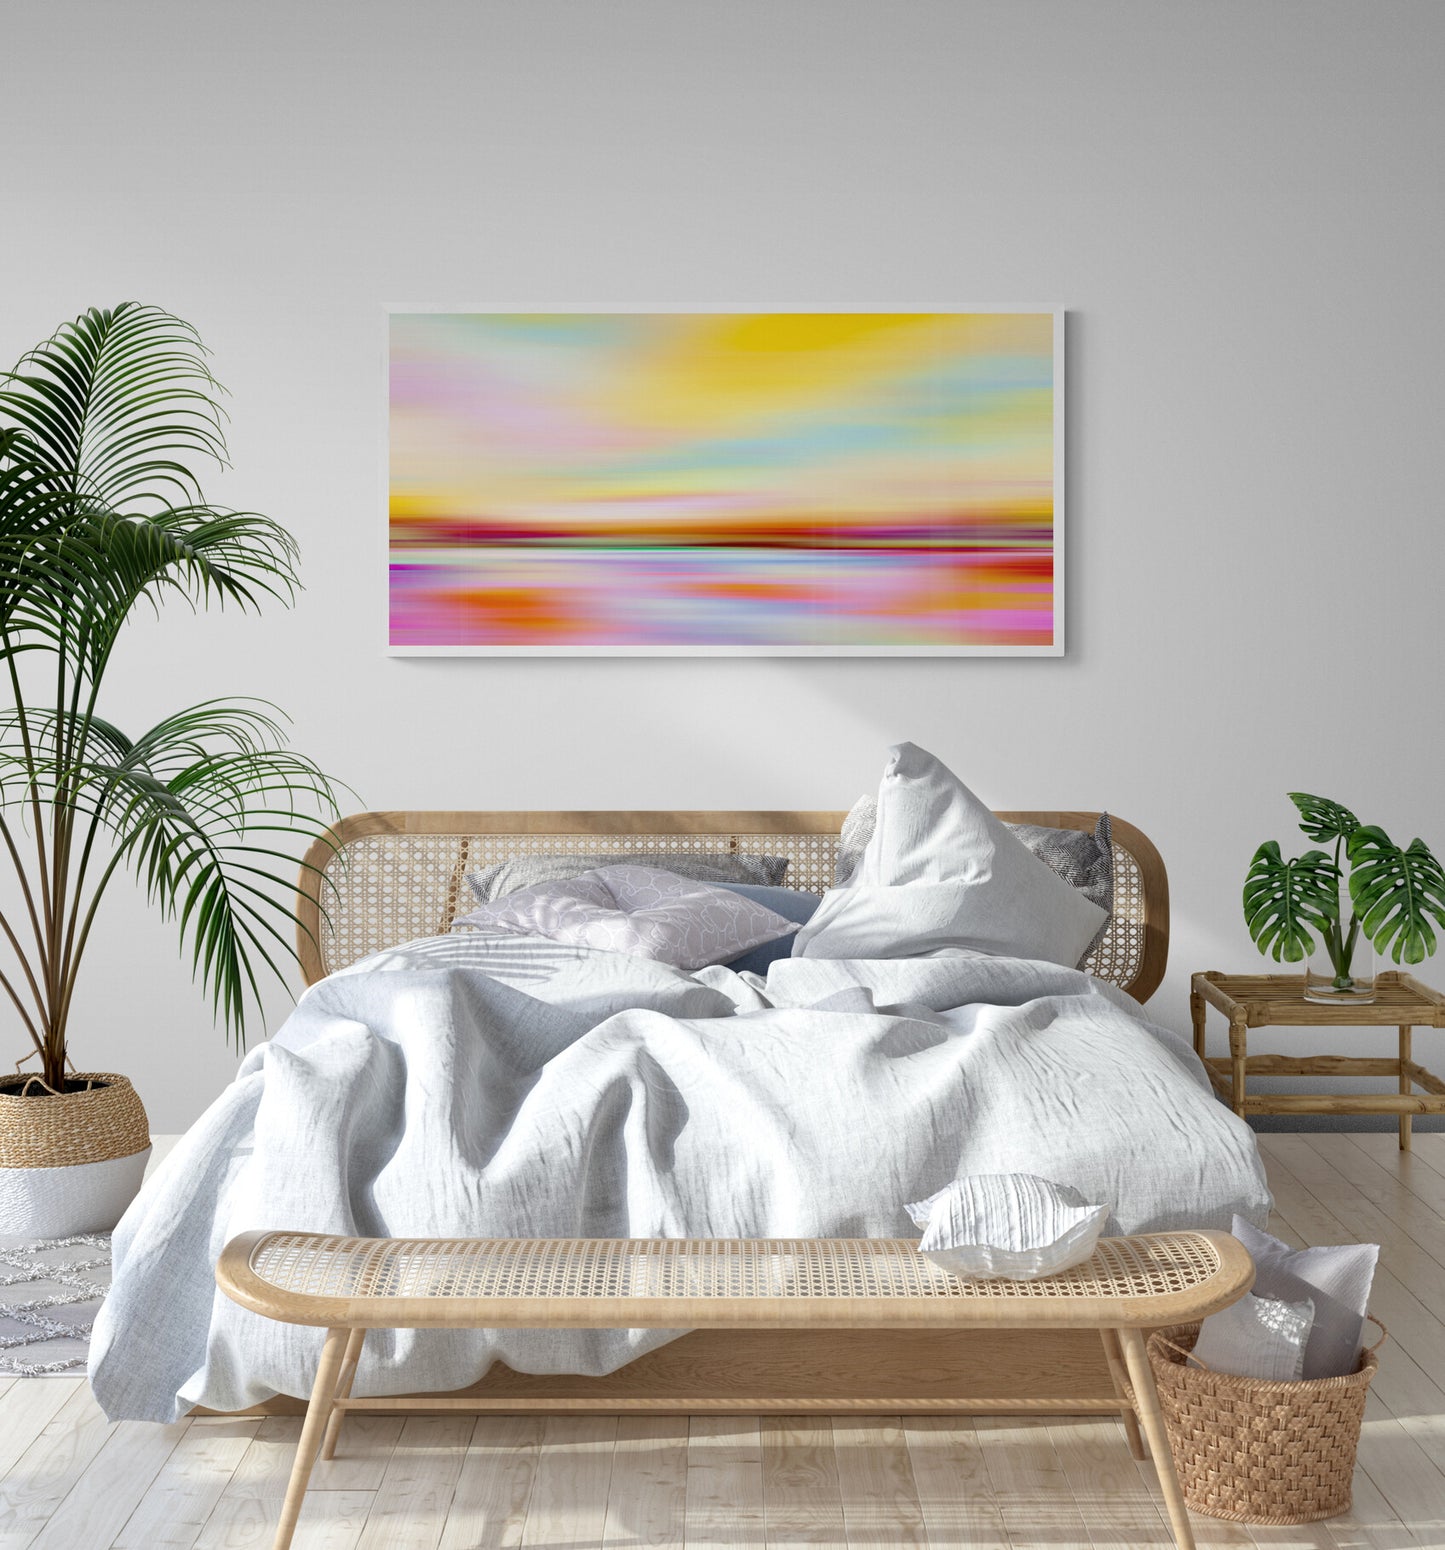 Colourful Abstract Landscape Wall Art Giclee Print on Stretched Canvas